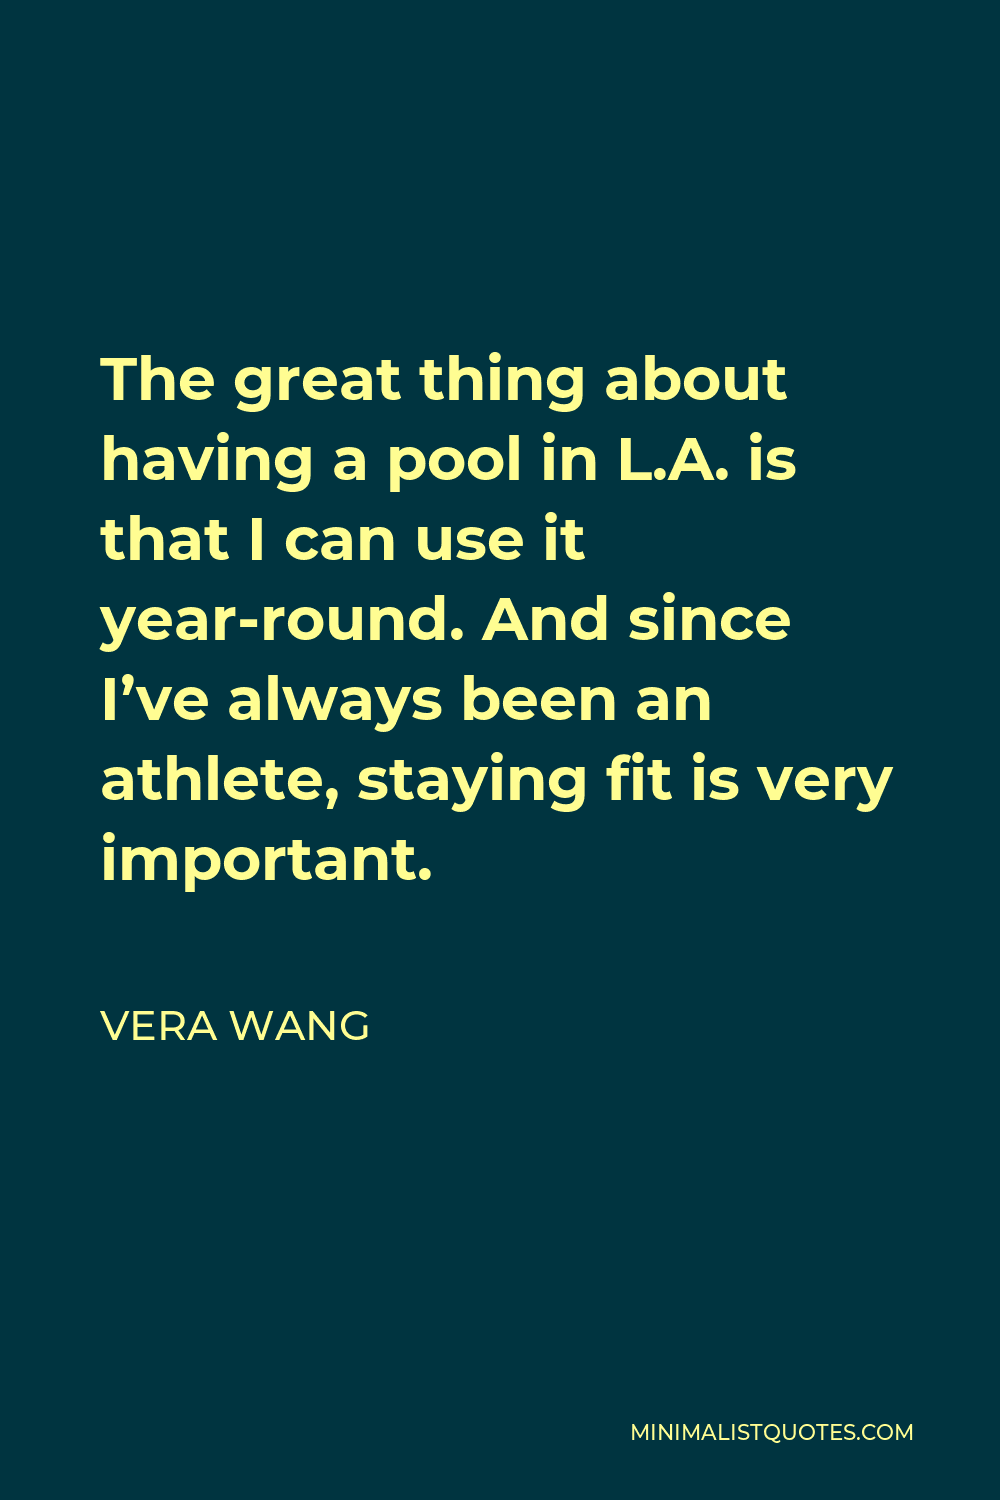 Vera Wang Quote - The great thing about having a pool in L.A. is that I can use it year-round. And since I’ve always been an athlete, staying fit is very important.